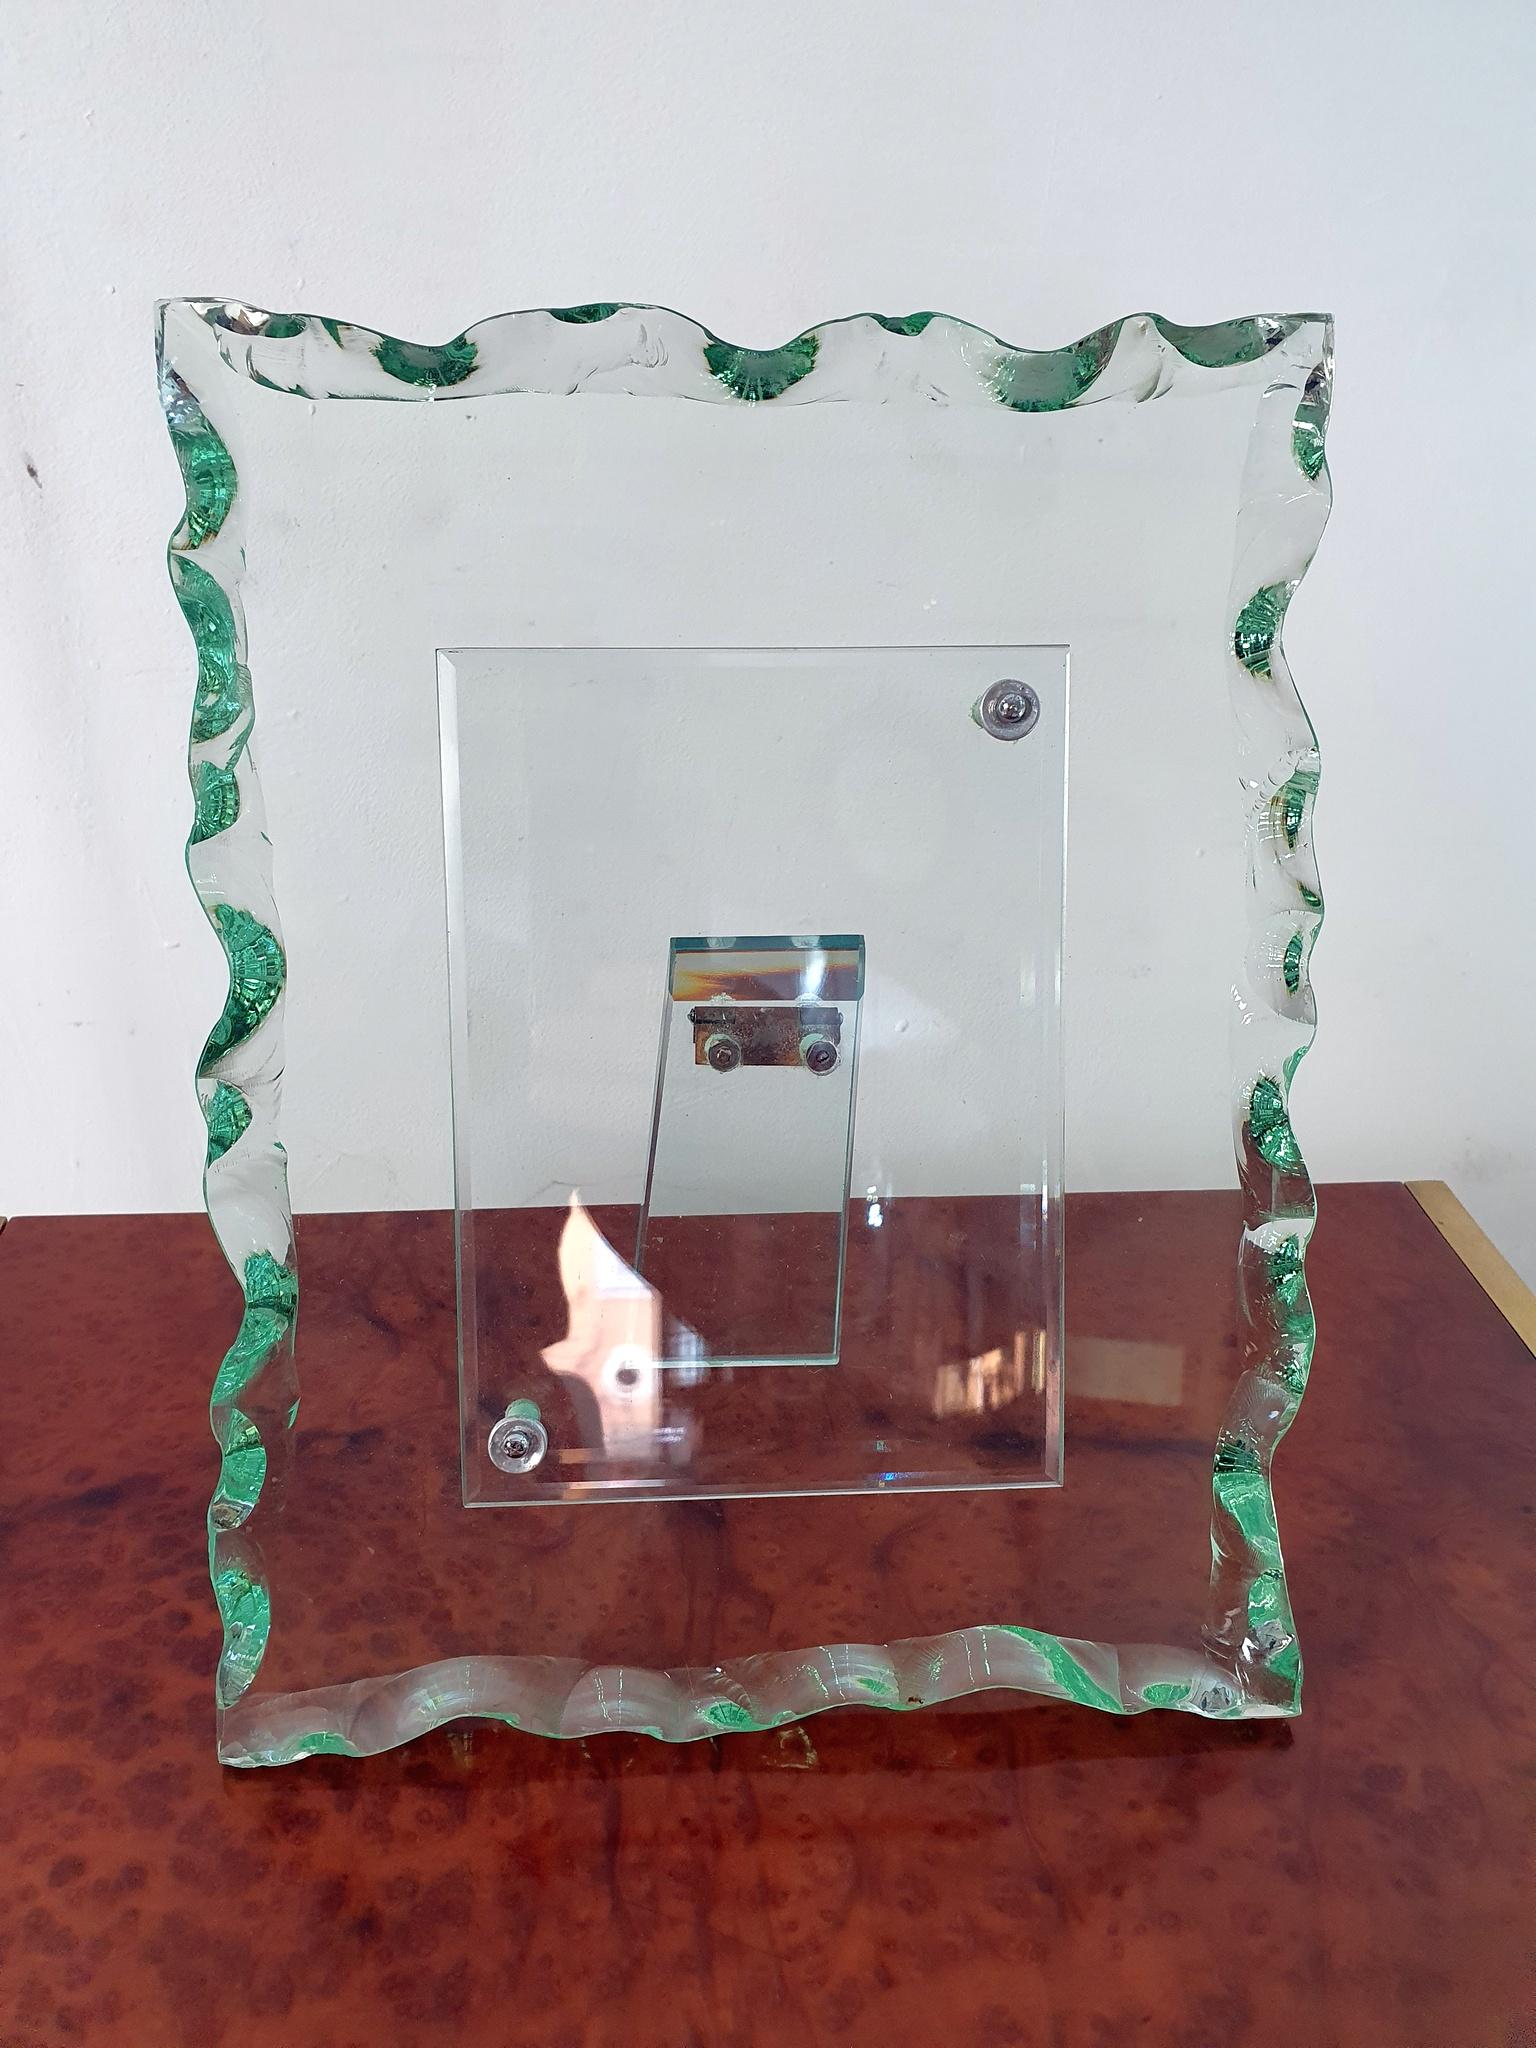 Crystal photo frame attributed to Pietro Chiesa for Fontana Arte, Italy. Produced sometime during the 1940s. The entire frame including the backrest is made in the typical green glass that has become synonymous with Fontana Arte. The measurement of